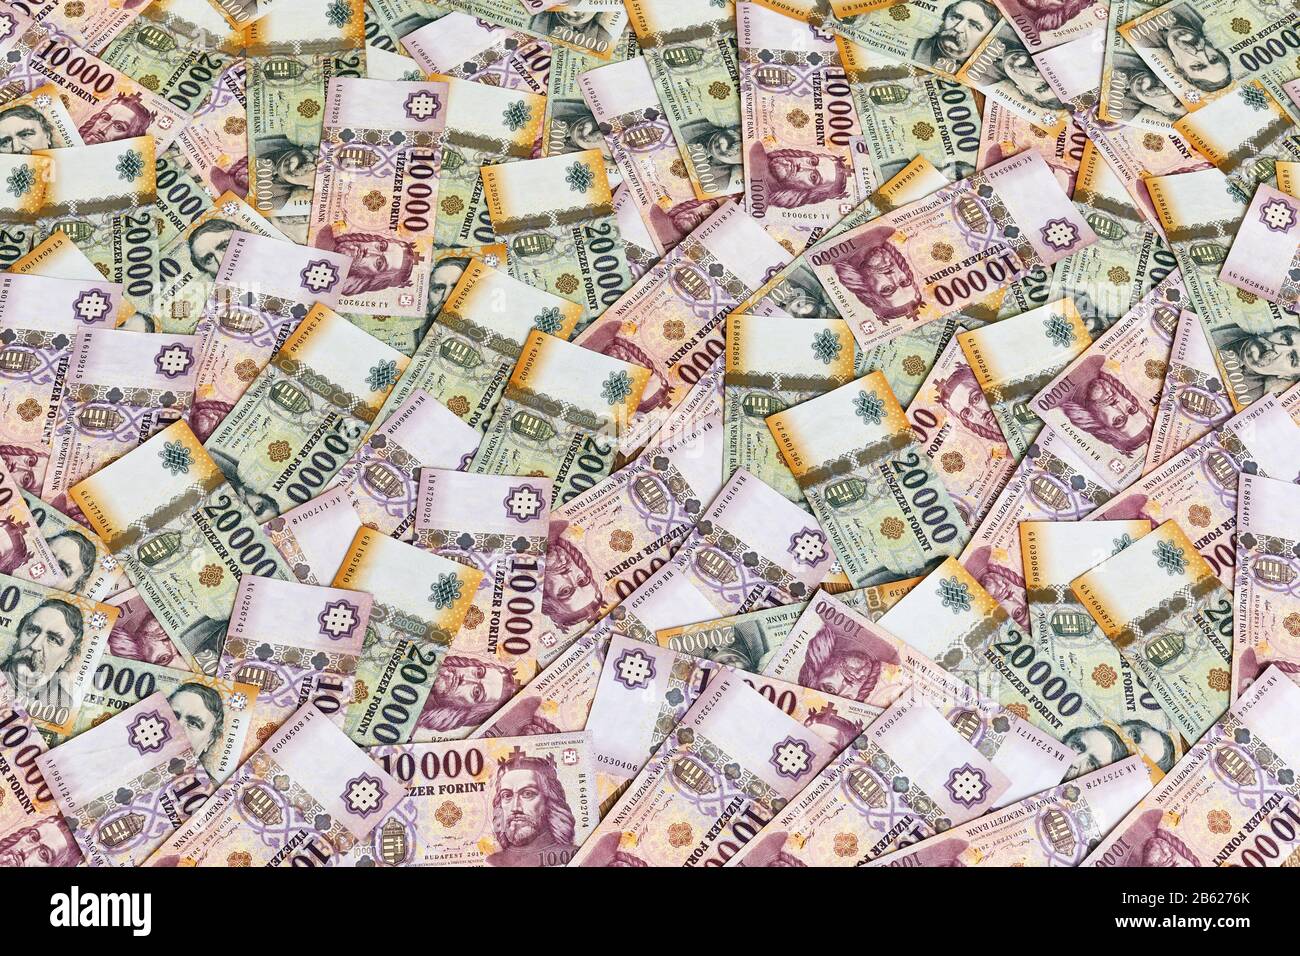 Money Banknotes Background, Hungarian Forints Stock Photo